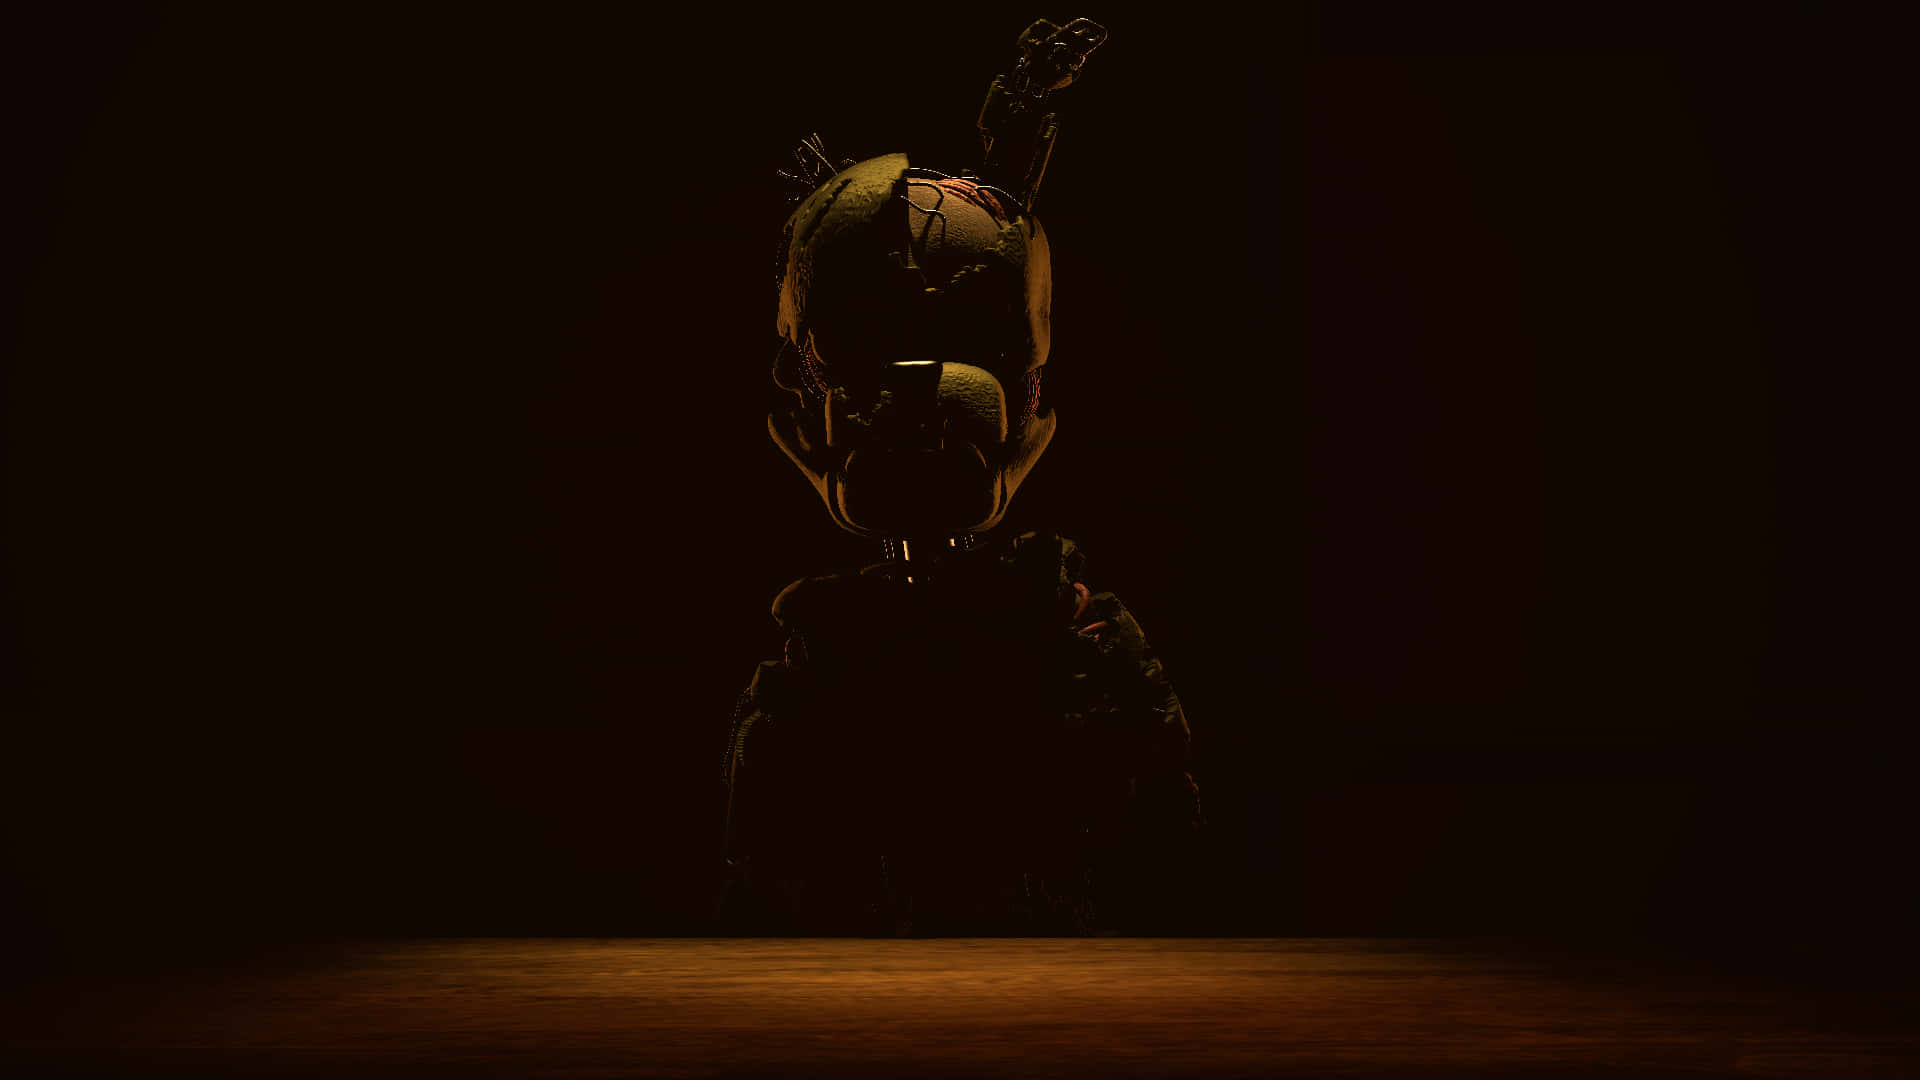 Intimidating Scraptrap in a Spooky Environment Wallpaper